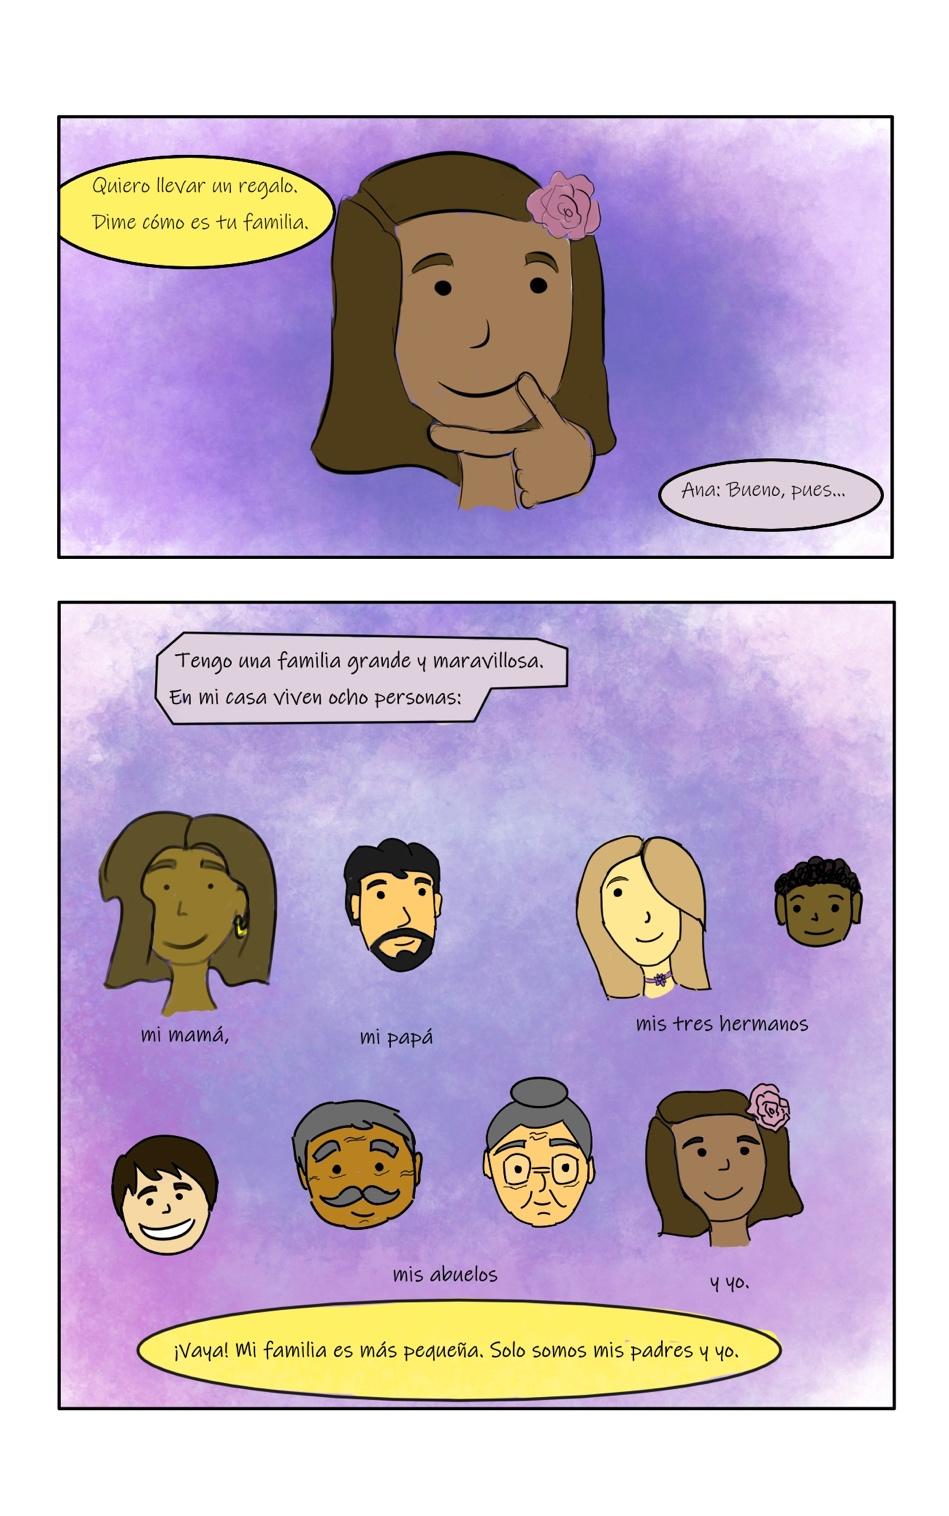 Panel 1: The panel zooms in on Ana thinking. Carlos says, "Quiero llevar un regalo. Dime comó es tu familia." Ana says, "Bueno, pues..." Panel 2: The panels shows pictures of each of of Ana's family members. "Tengo una familia grande y maravillosa. En mi casa viven ocho personas: mi mamá [a woman with brown skin and brown hair in a bob], mi papá [a man with black hair with a black beard and mustache], mis tres hermanos [a college-age sister with pale skin and blonde hair covering one eye, a young boy with brown skin and curly black hair, and a tween boy with pale skin and dark brown hair. They are all smiling], mis abuelos [a man with gray hair, eyebrows, and mustache on his wrinkled face, and a woman wearing glasses with pale skin, wrinkles, and gray hair in a bun], y yo [shows a picture of Ana, with medium brown skin and brown hair, with a pink flower in it]." Carlos says, "¡Vaya! Mi familia es más pequeña. Solo somos mis padres y yo."